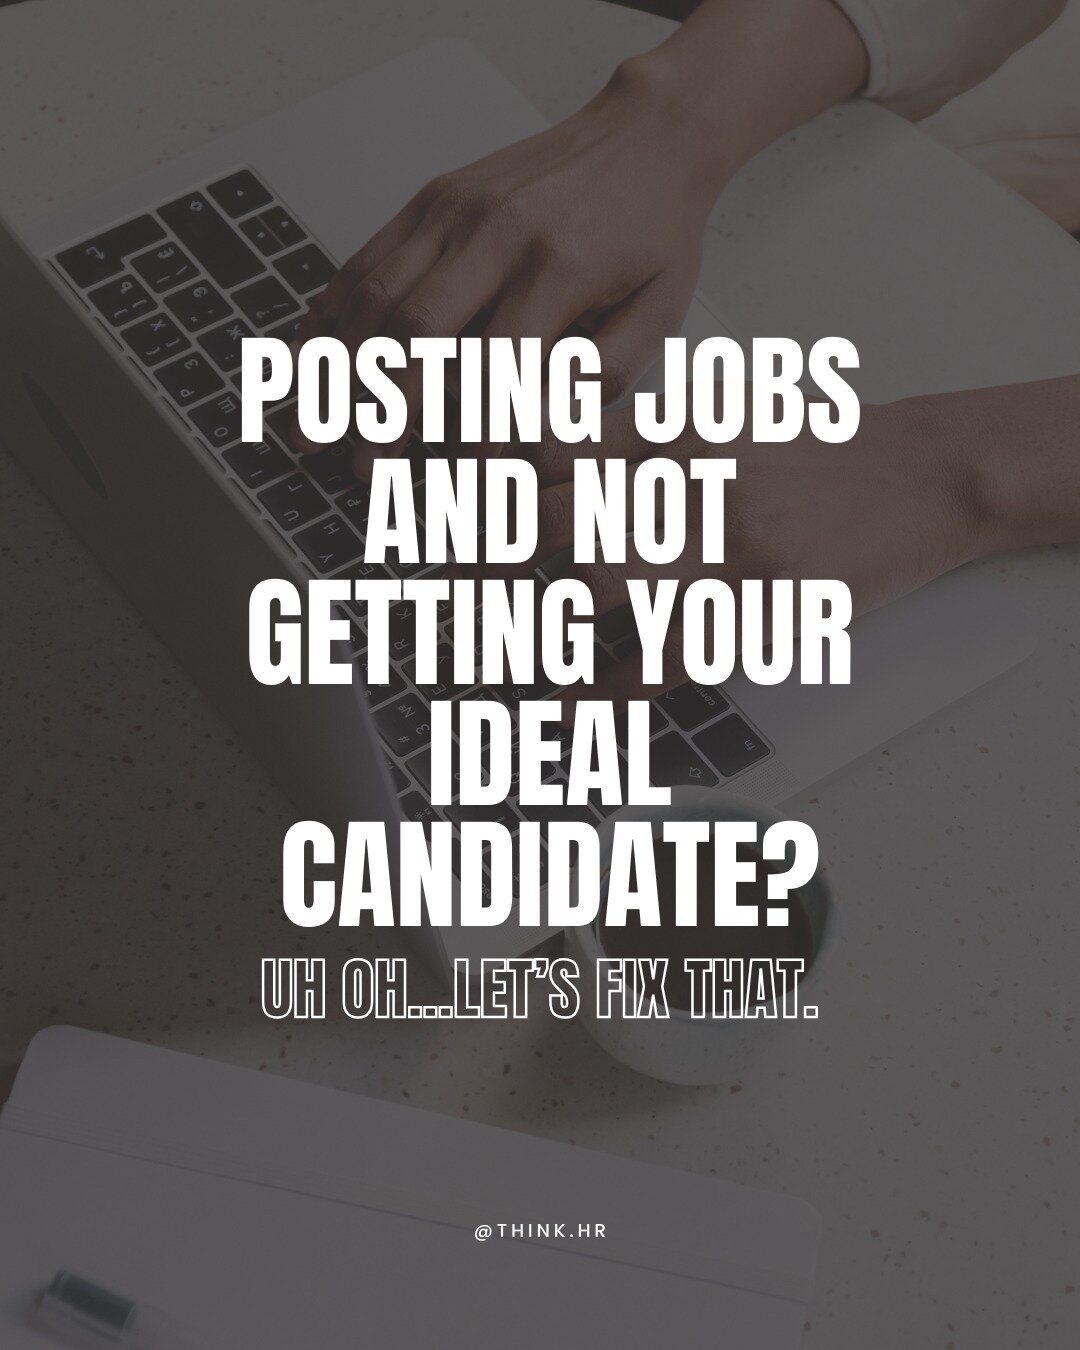 Let's have a little chat! ❤️

If you have been posting jobs consistently and the applicants are not the qualified ones you're looking for, or your new hires don't seem to last...

we might have ineffective job postings on our hands 😬

If you are not